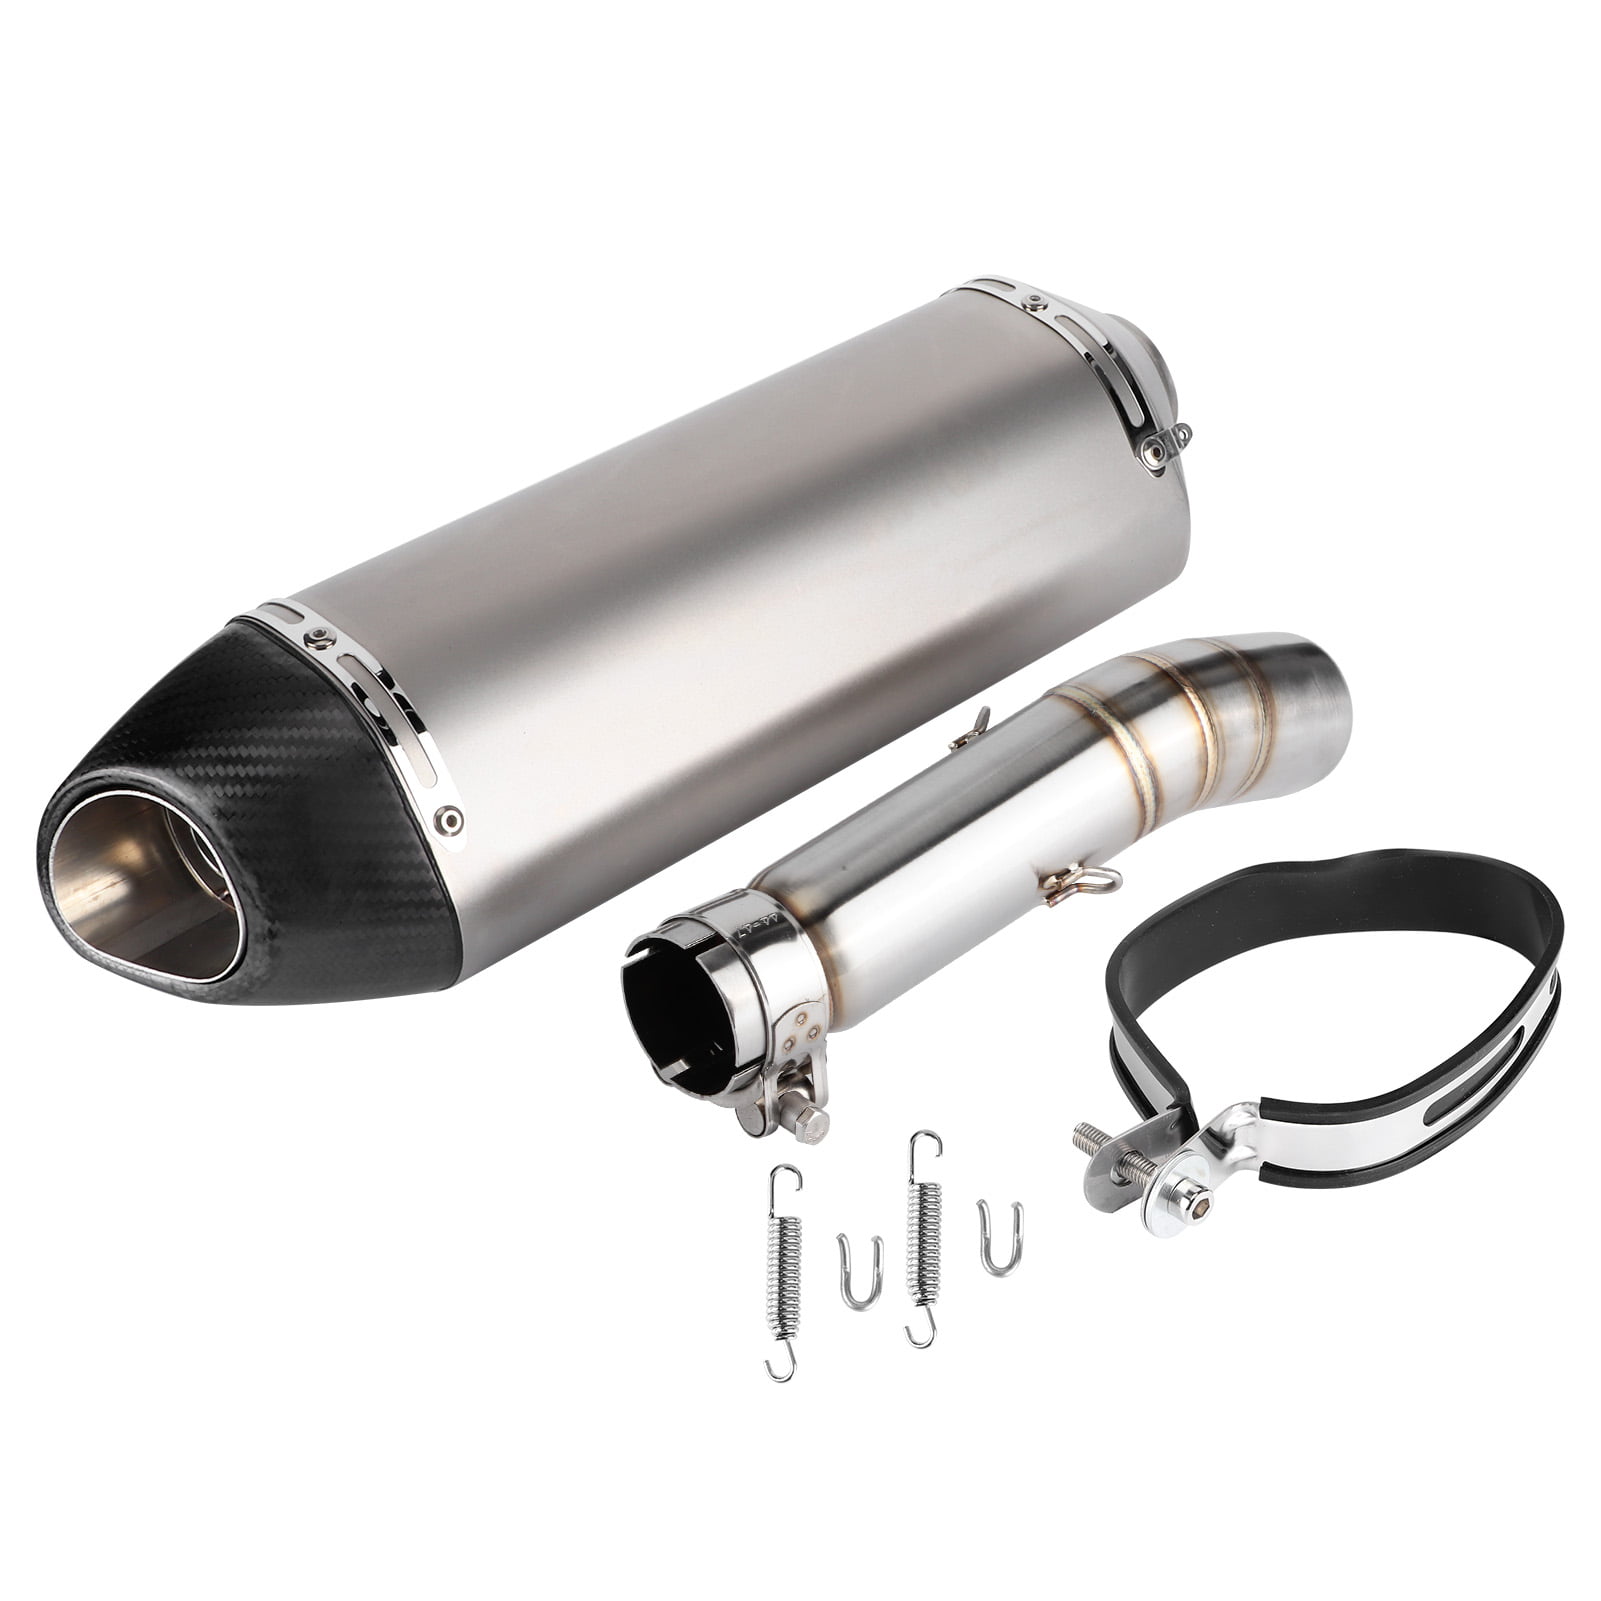 DB Killer Ti color 2" ATV Motorcycle Stainless Steel Exhaust Muffler Pipe Tube 